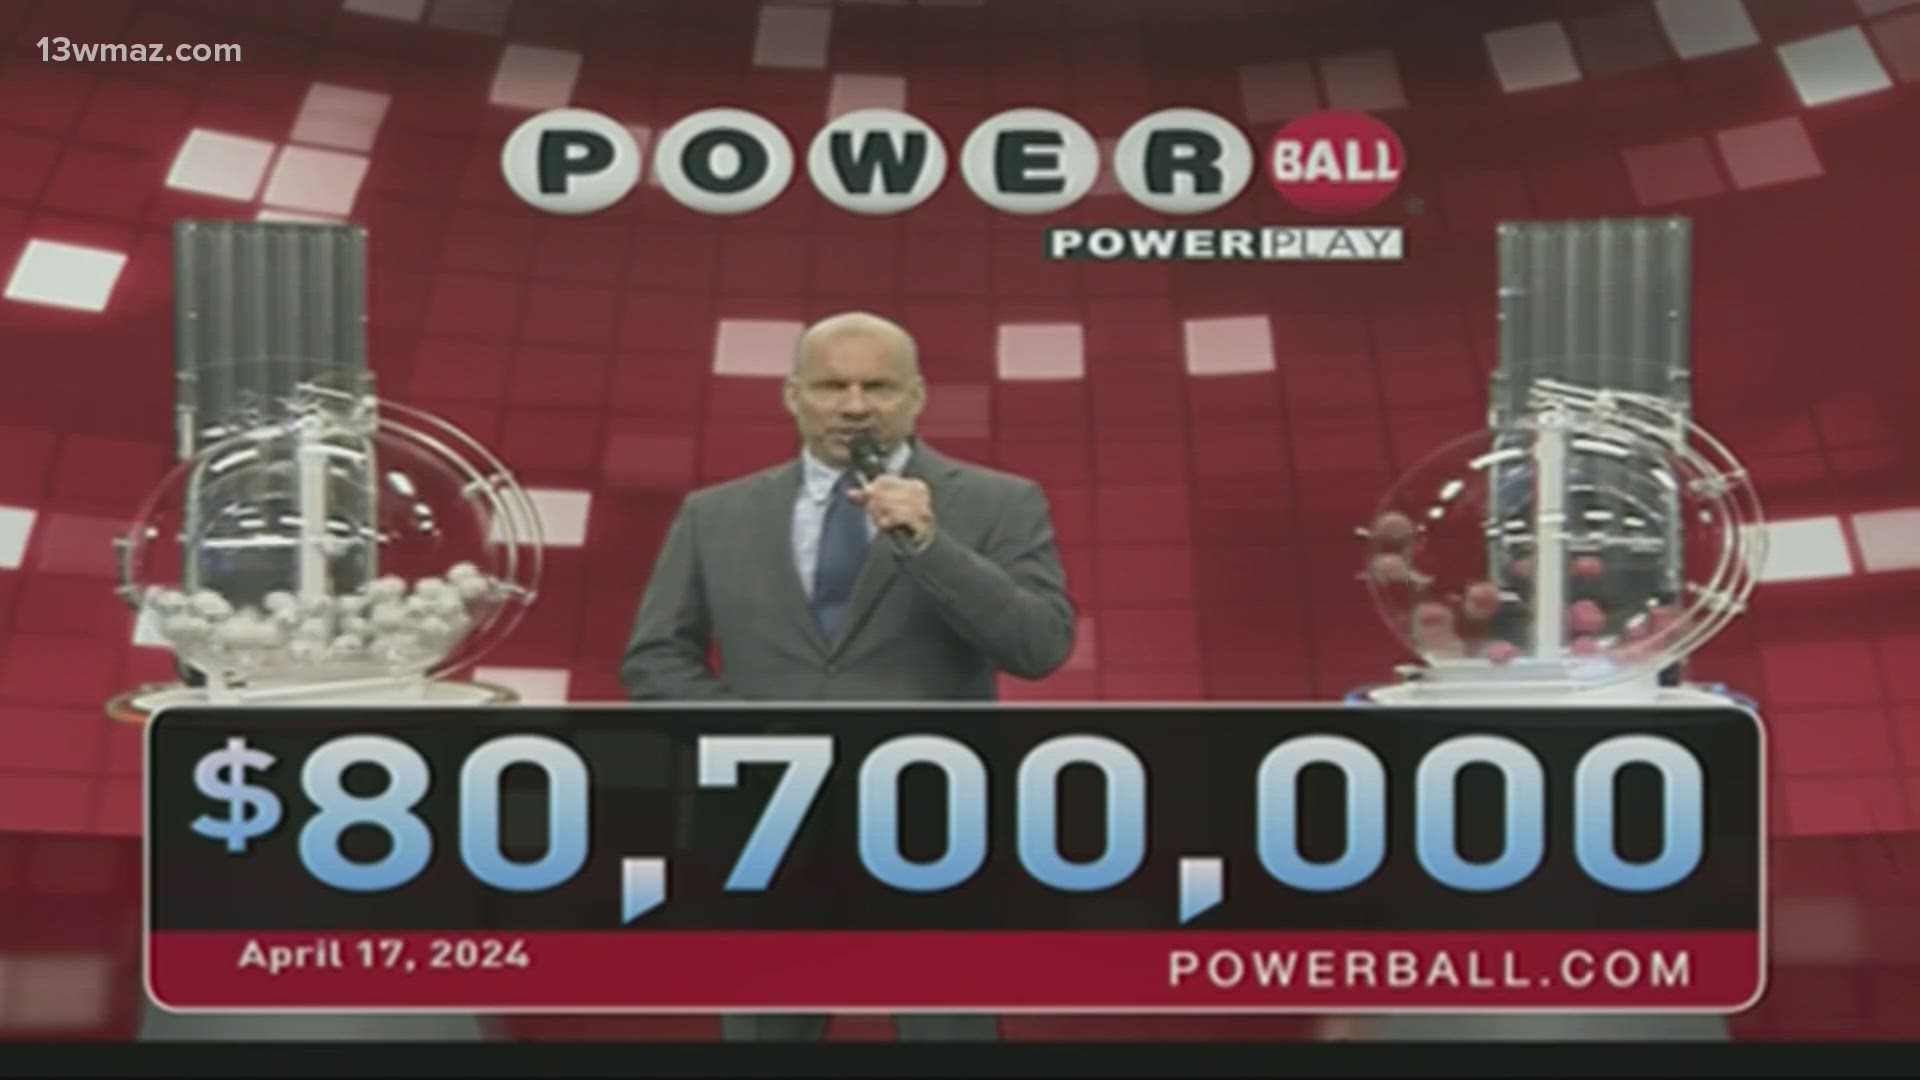 Here are the winning Powerball Numbers for April 17, 2024's $80.7 million jackpot. What would you do with that kind of cash?